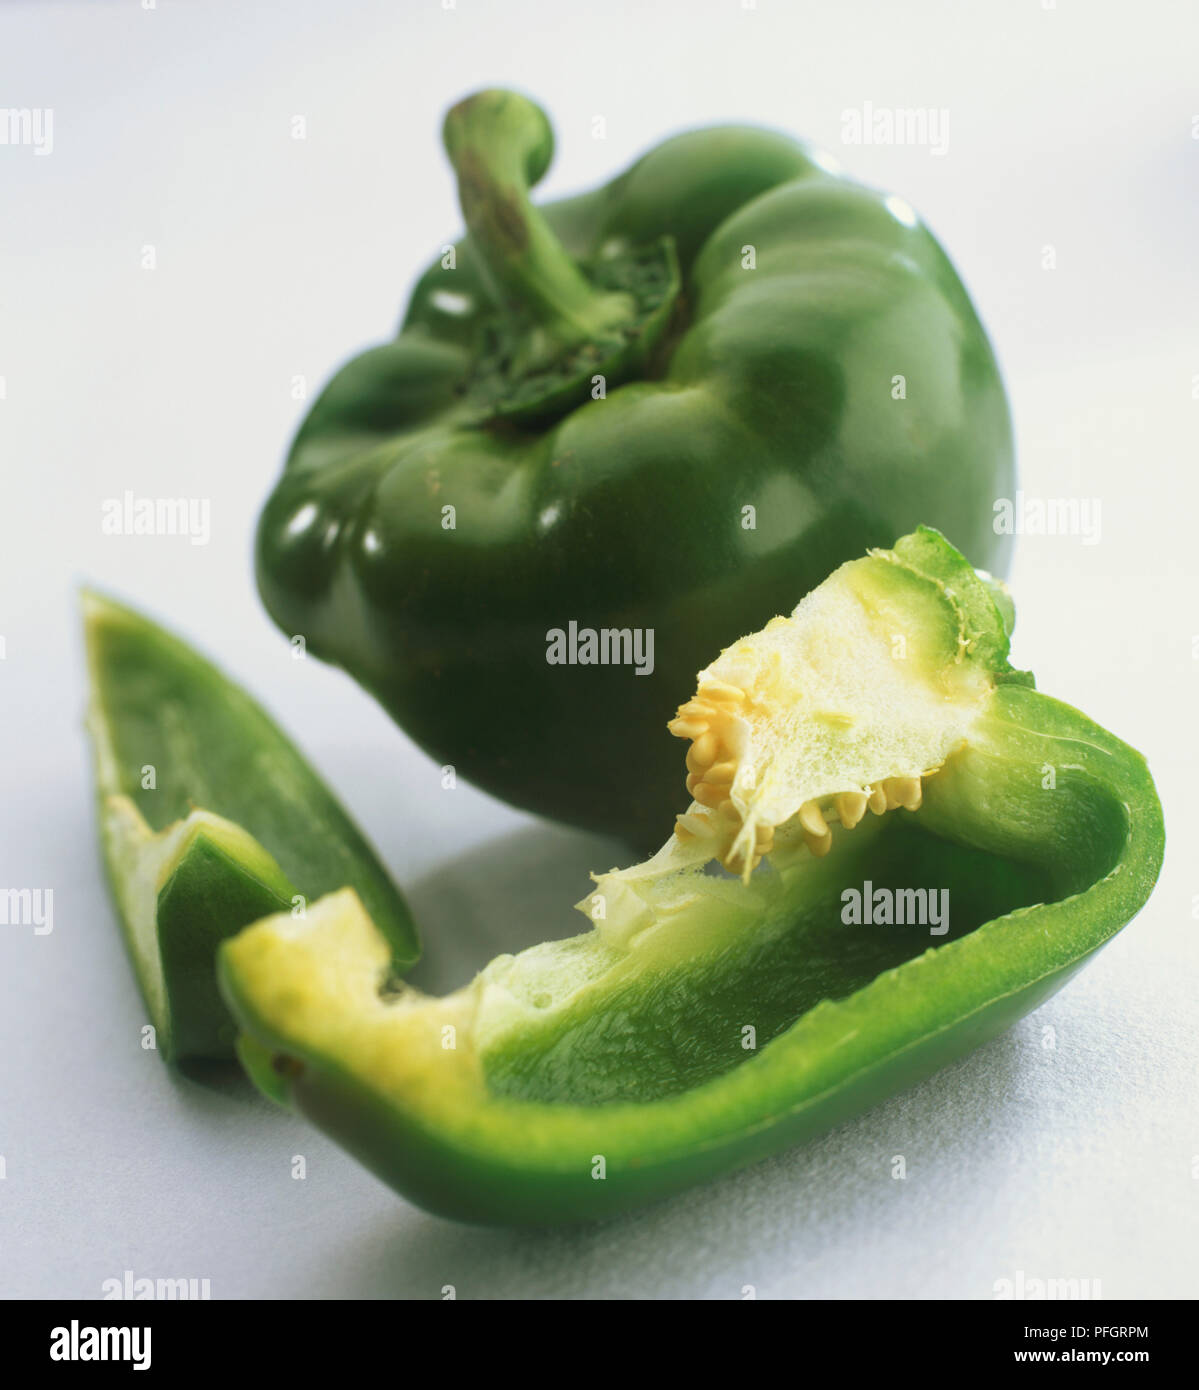 Whole green pepper and separate slices showing seeds. Stock Photo